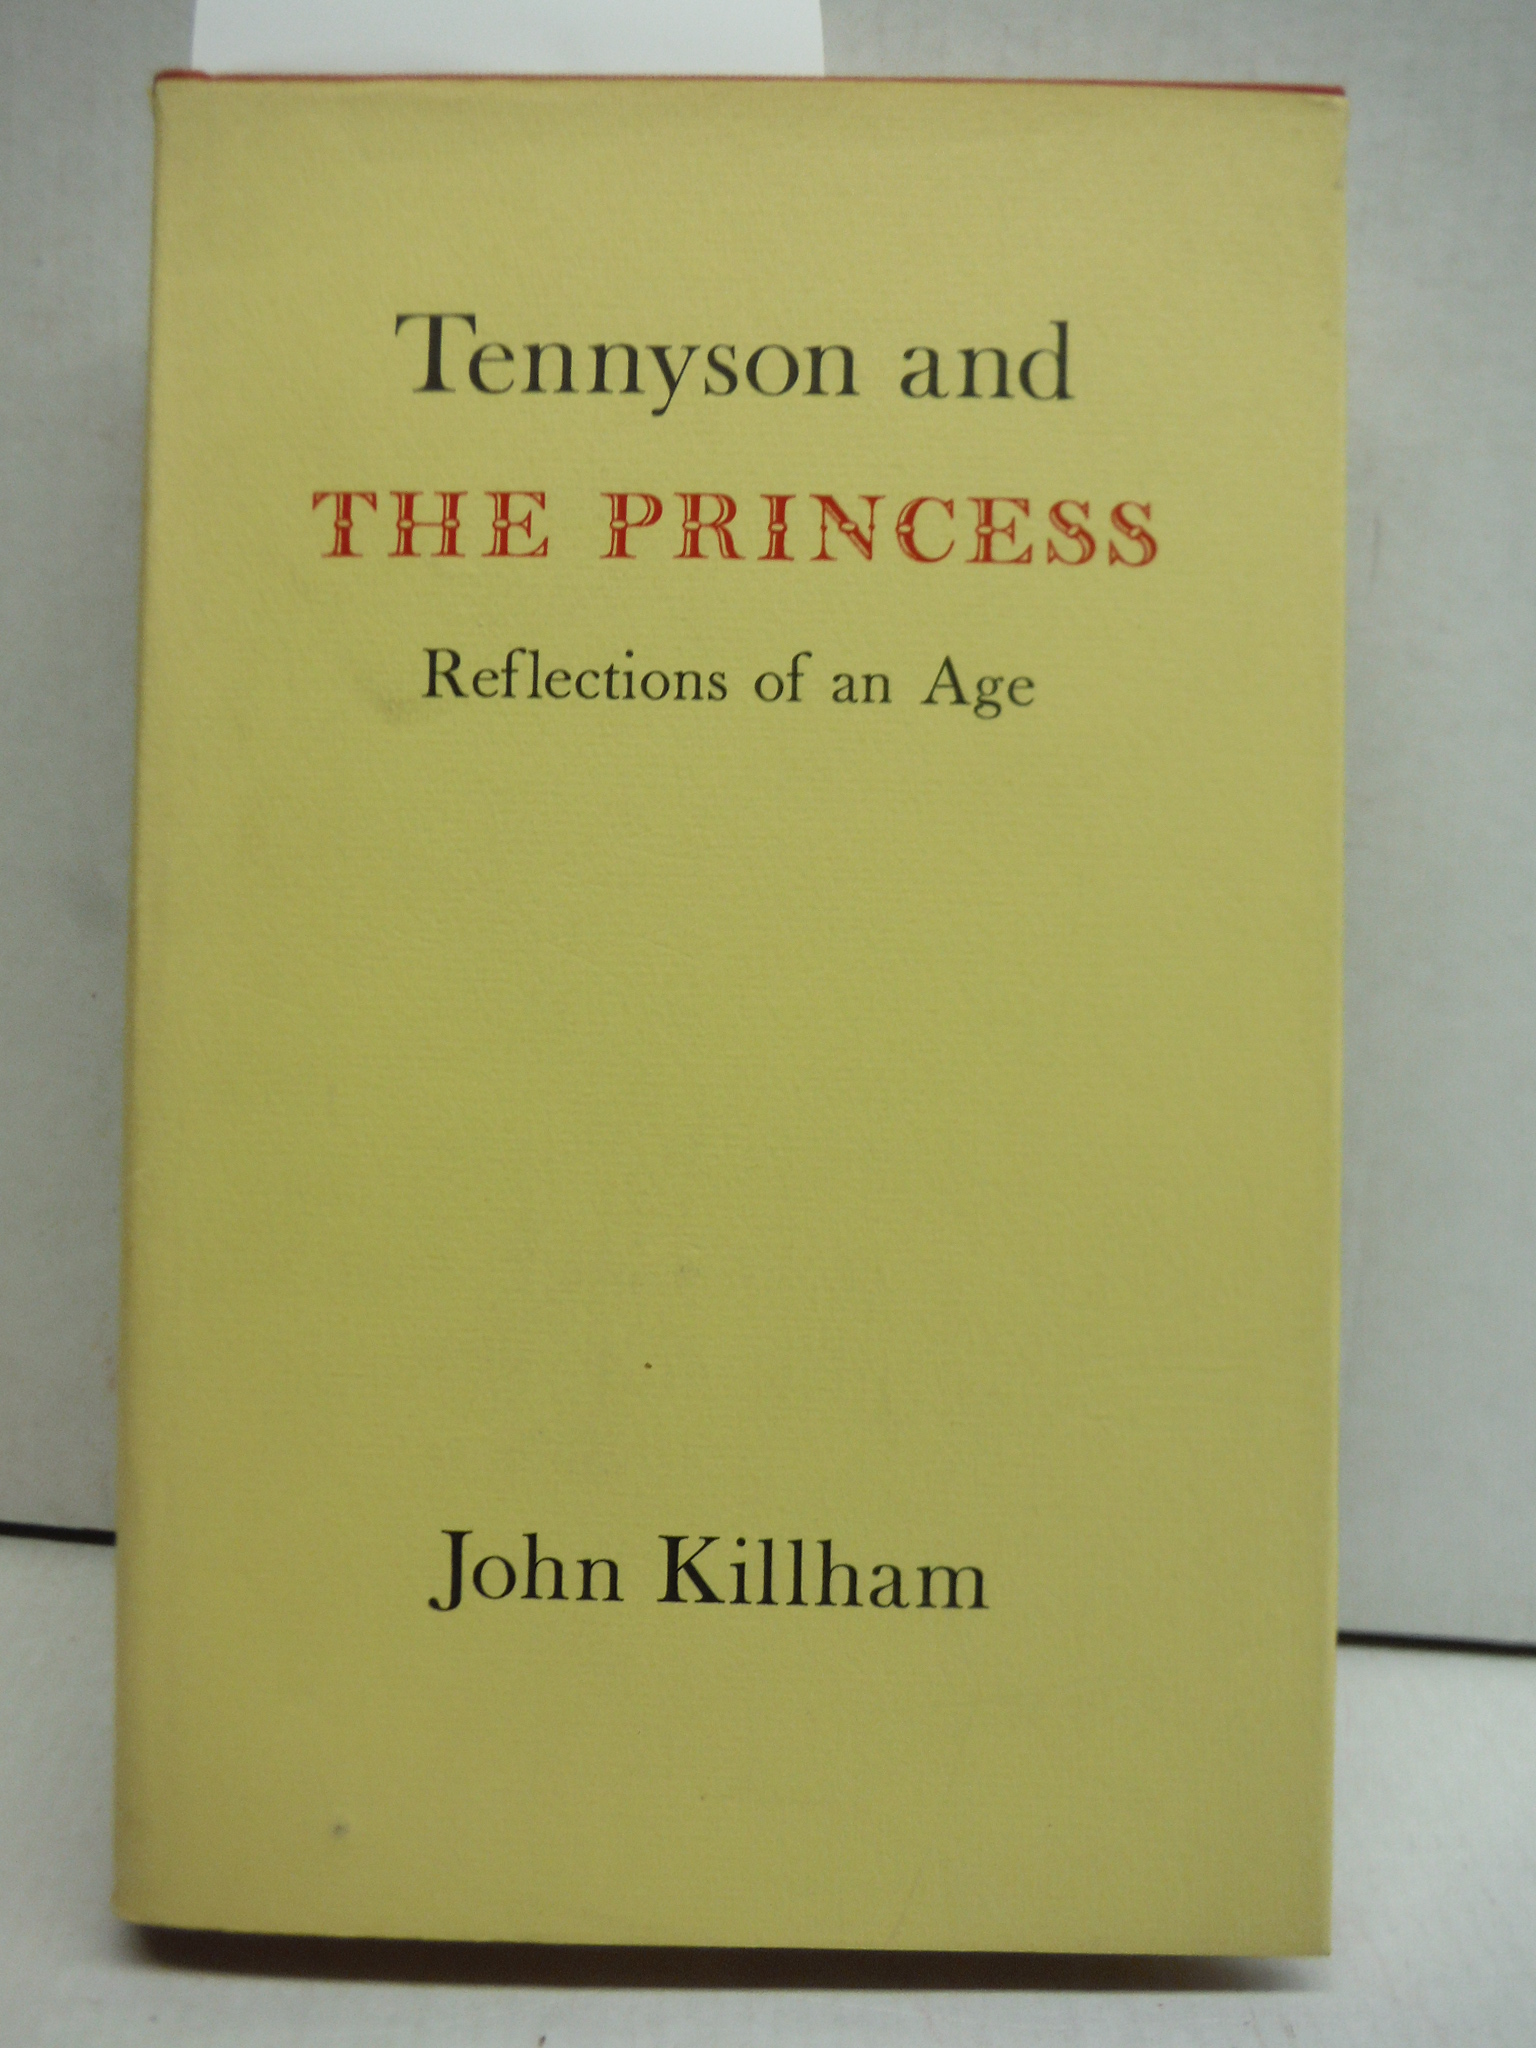 Tennyson and the Princess: Reflections of an Age